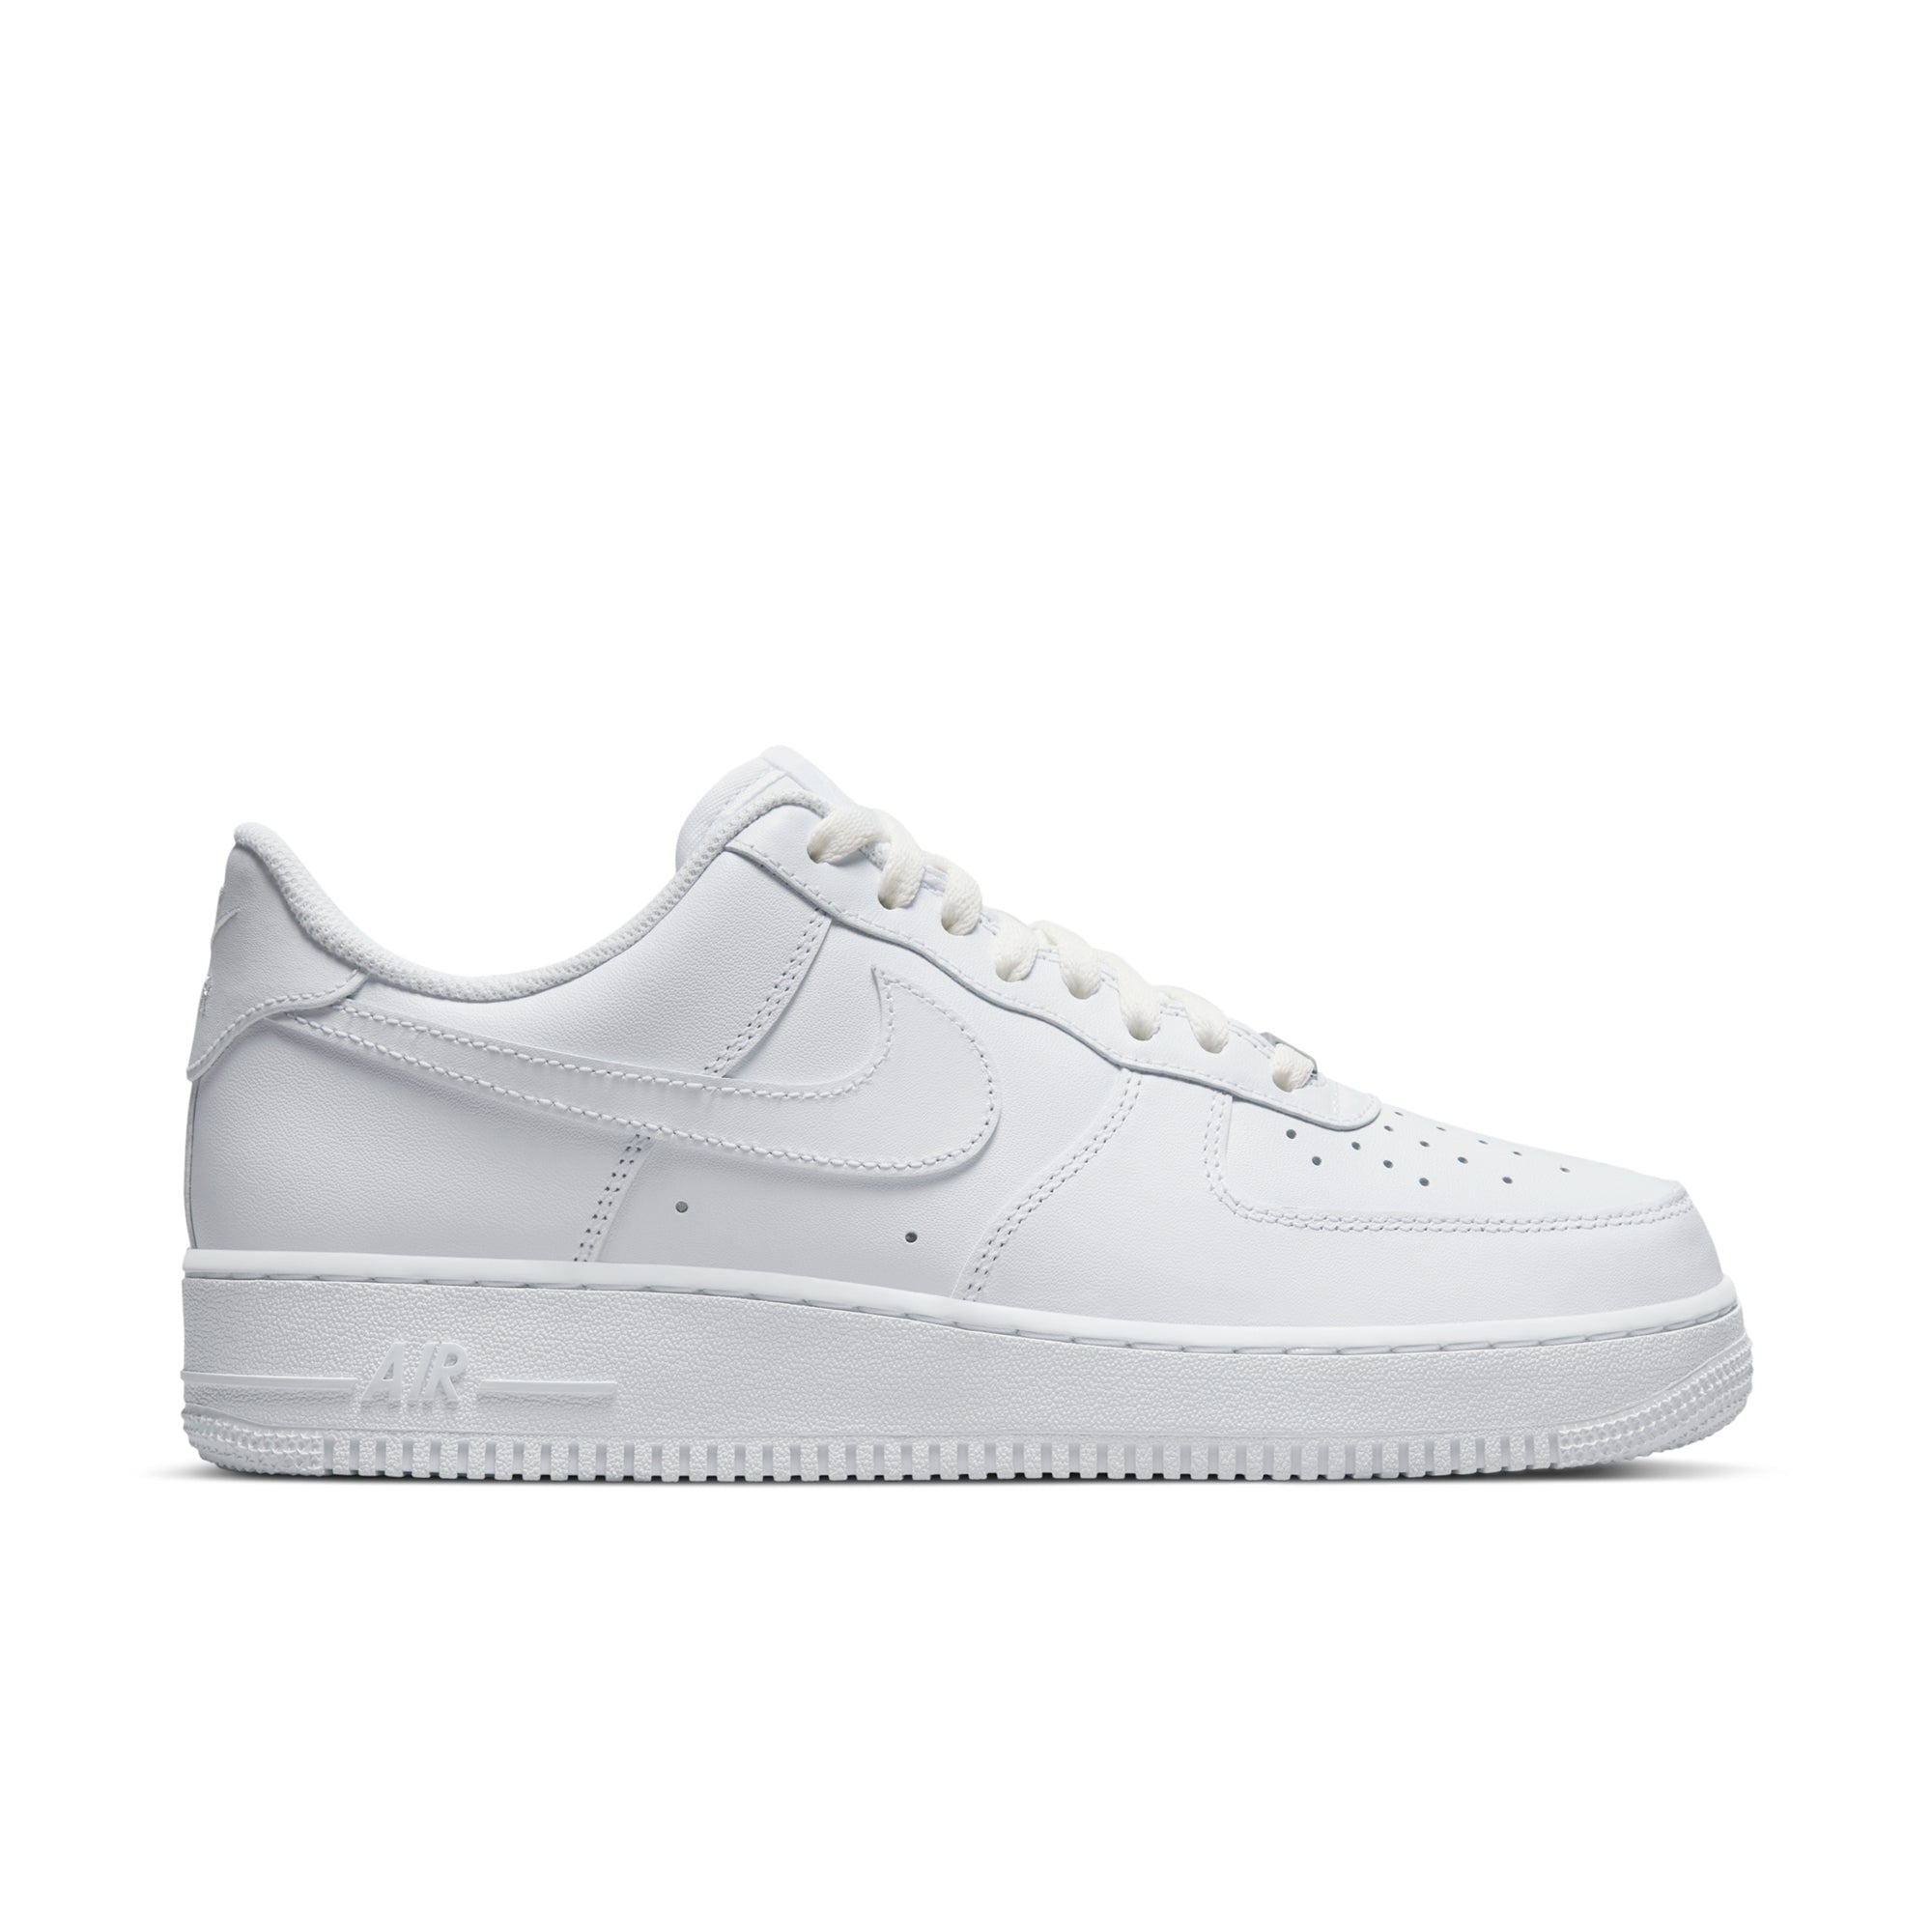 nike air force 1 high '07 Nike Air Force 1 Low '07 White | CW2288-111 42.5 - Livrare express 24 ore